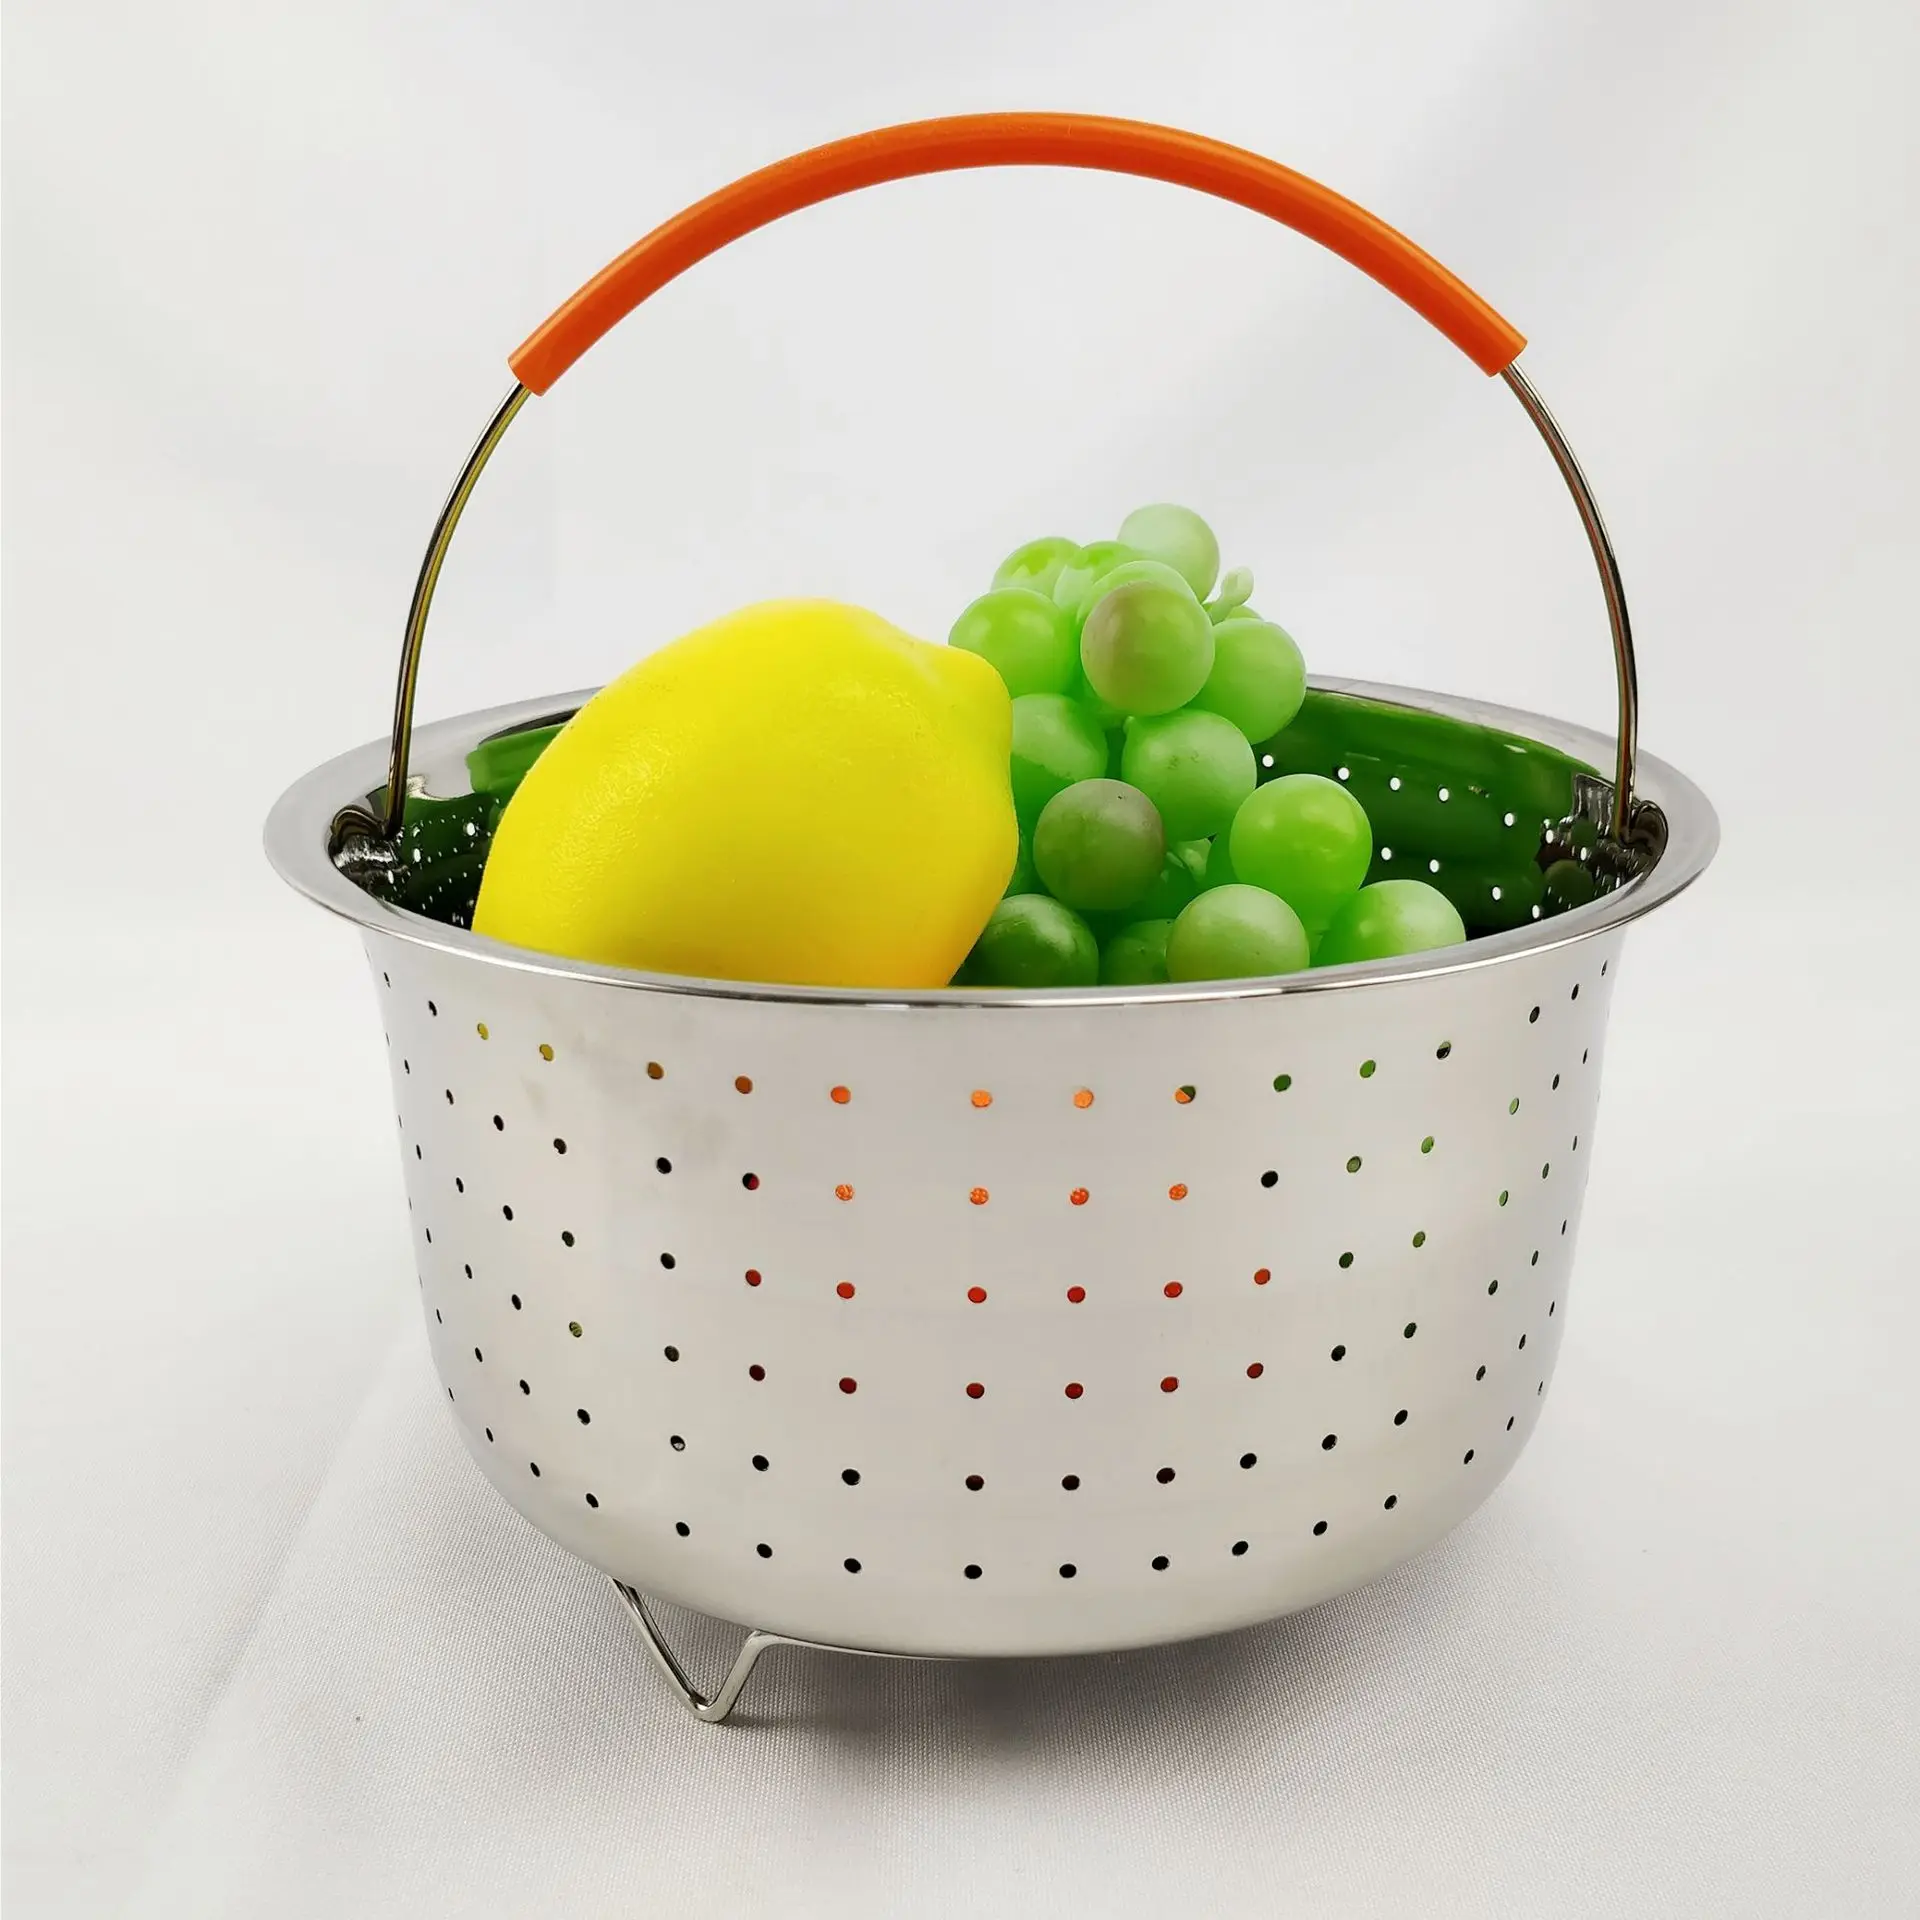 Steamer Basket,304 Stainless Steel Vegetable Steamer Basket, Steamer Rice Cooker  Basket Pressure Cooker Steamer Basket With Silicone Covered Handle Fo